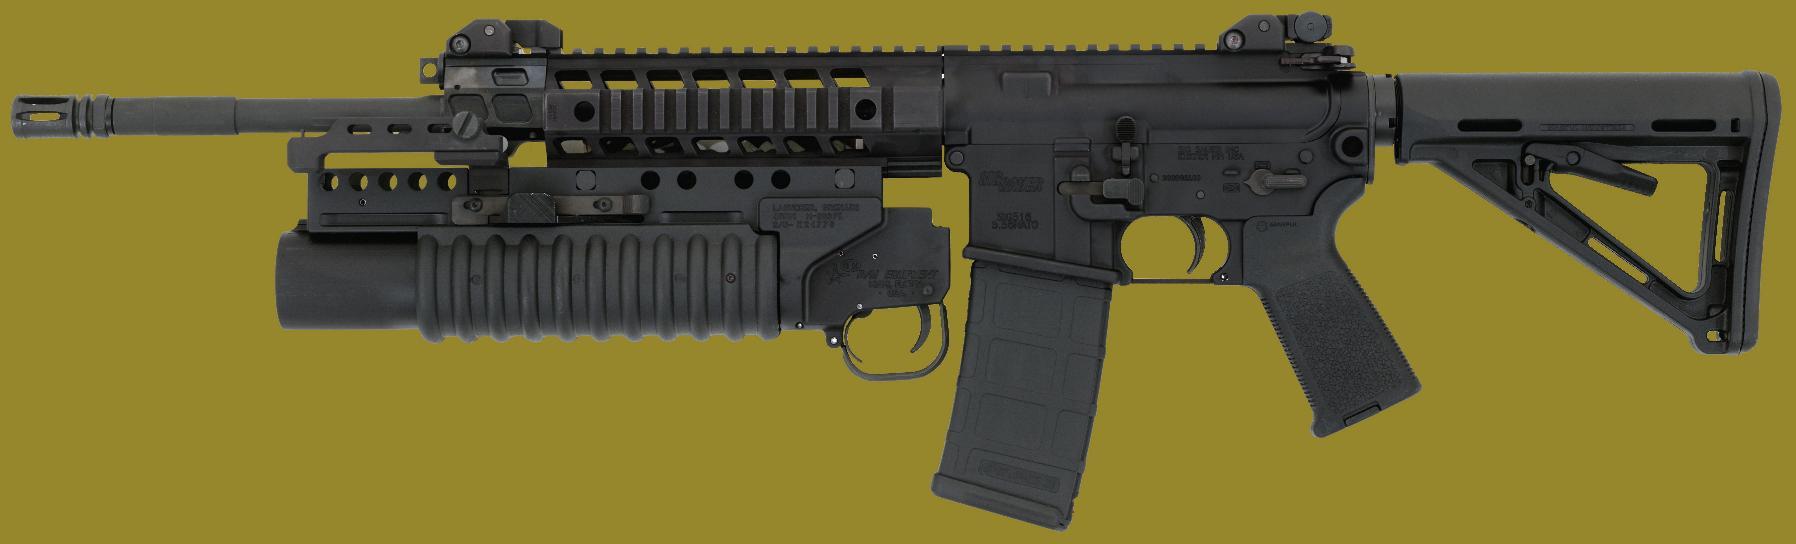 M203PI 40mm Grenade Launcher EGLM mounted on a rifle with rails certified by the manufacturer for use with a 40mm grenade launcher.